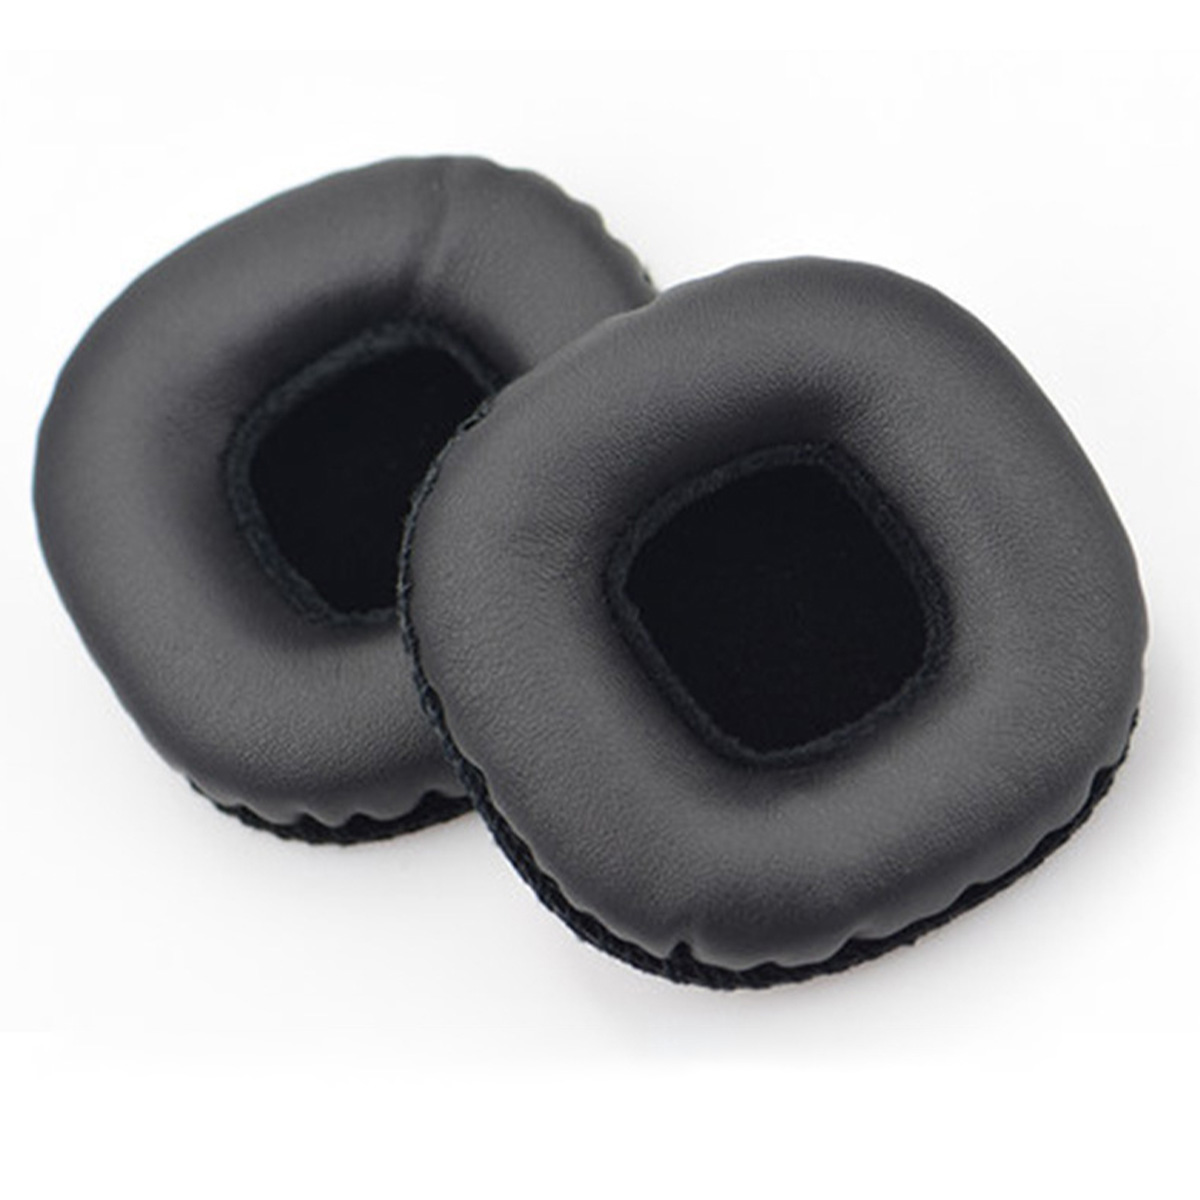 

2Pcs Replacement Earpads Earphone Cushion Cover for MID ANC Headphone